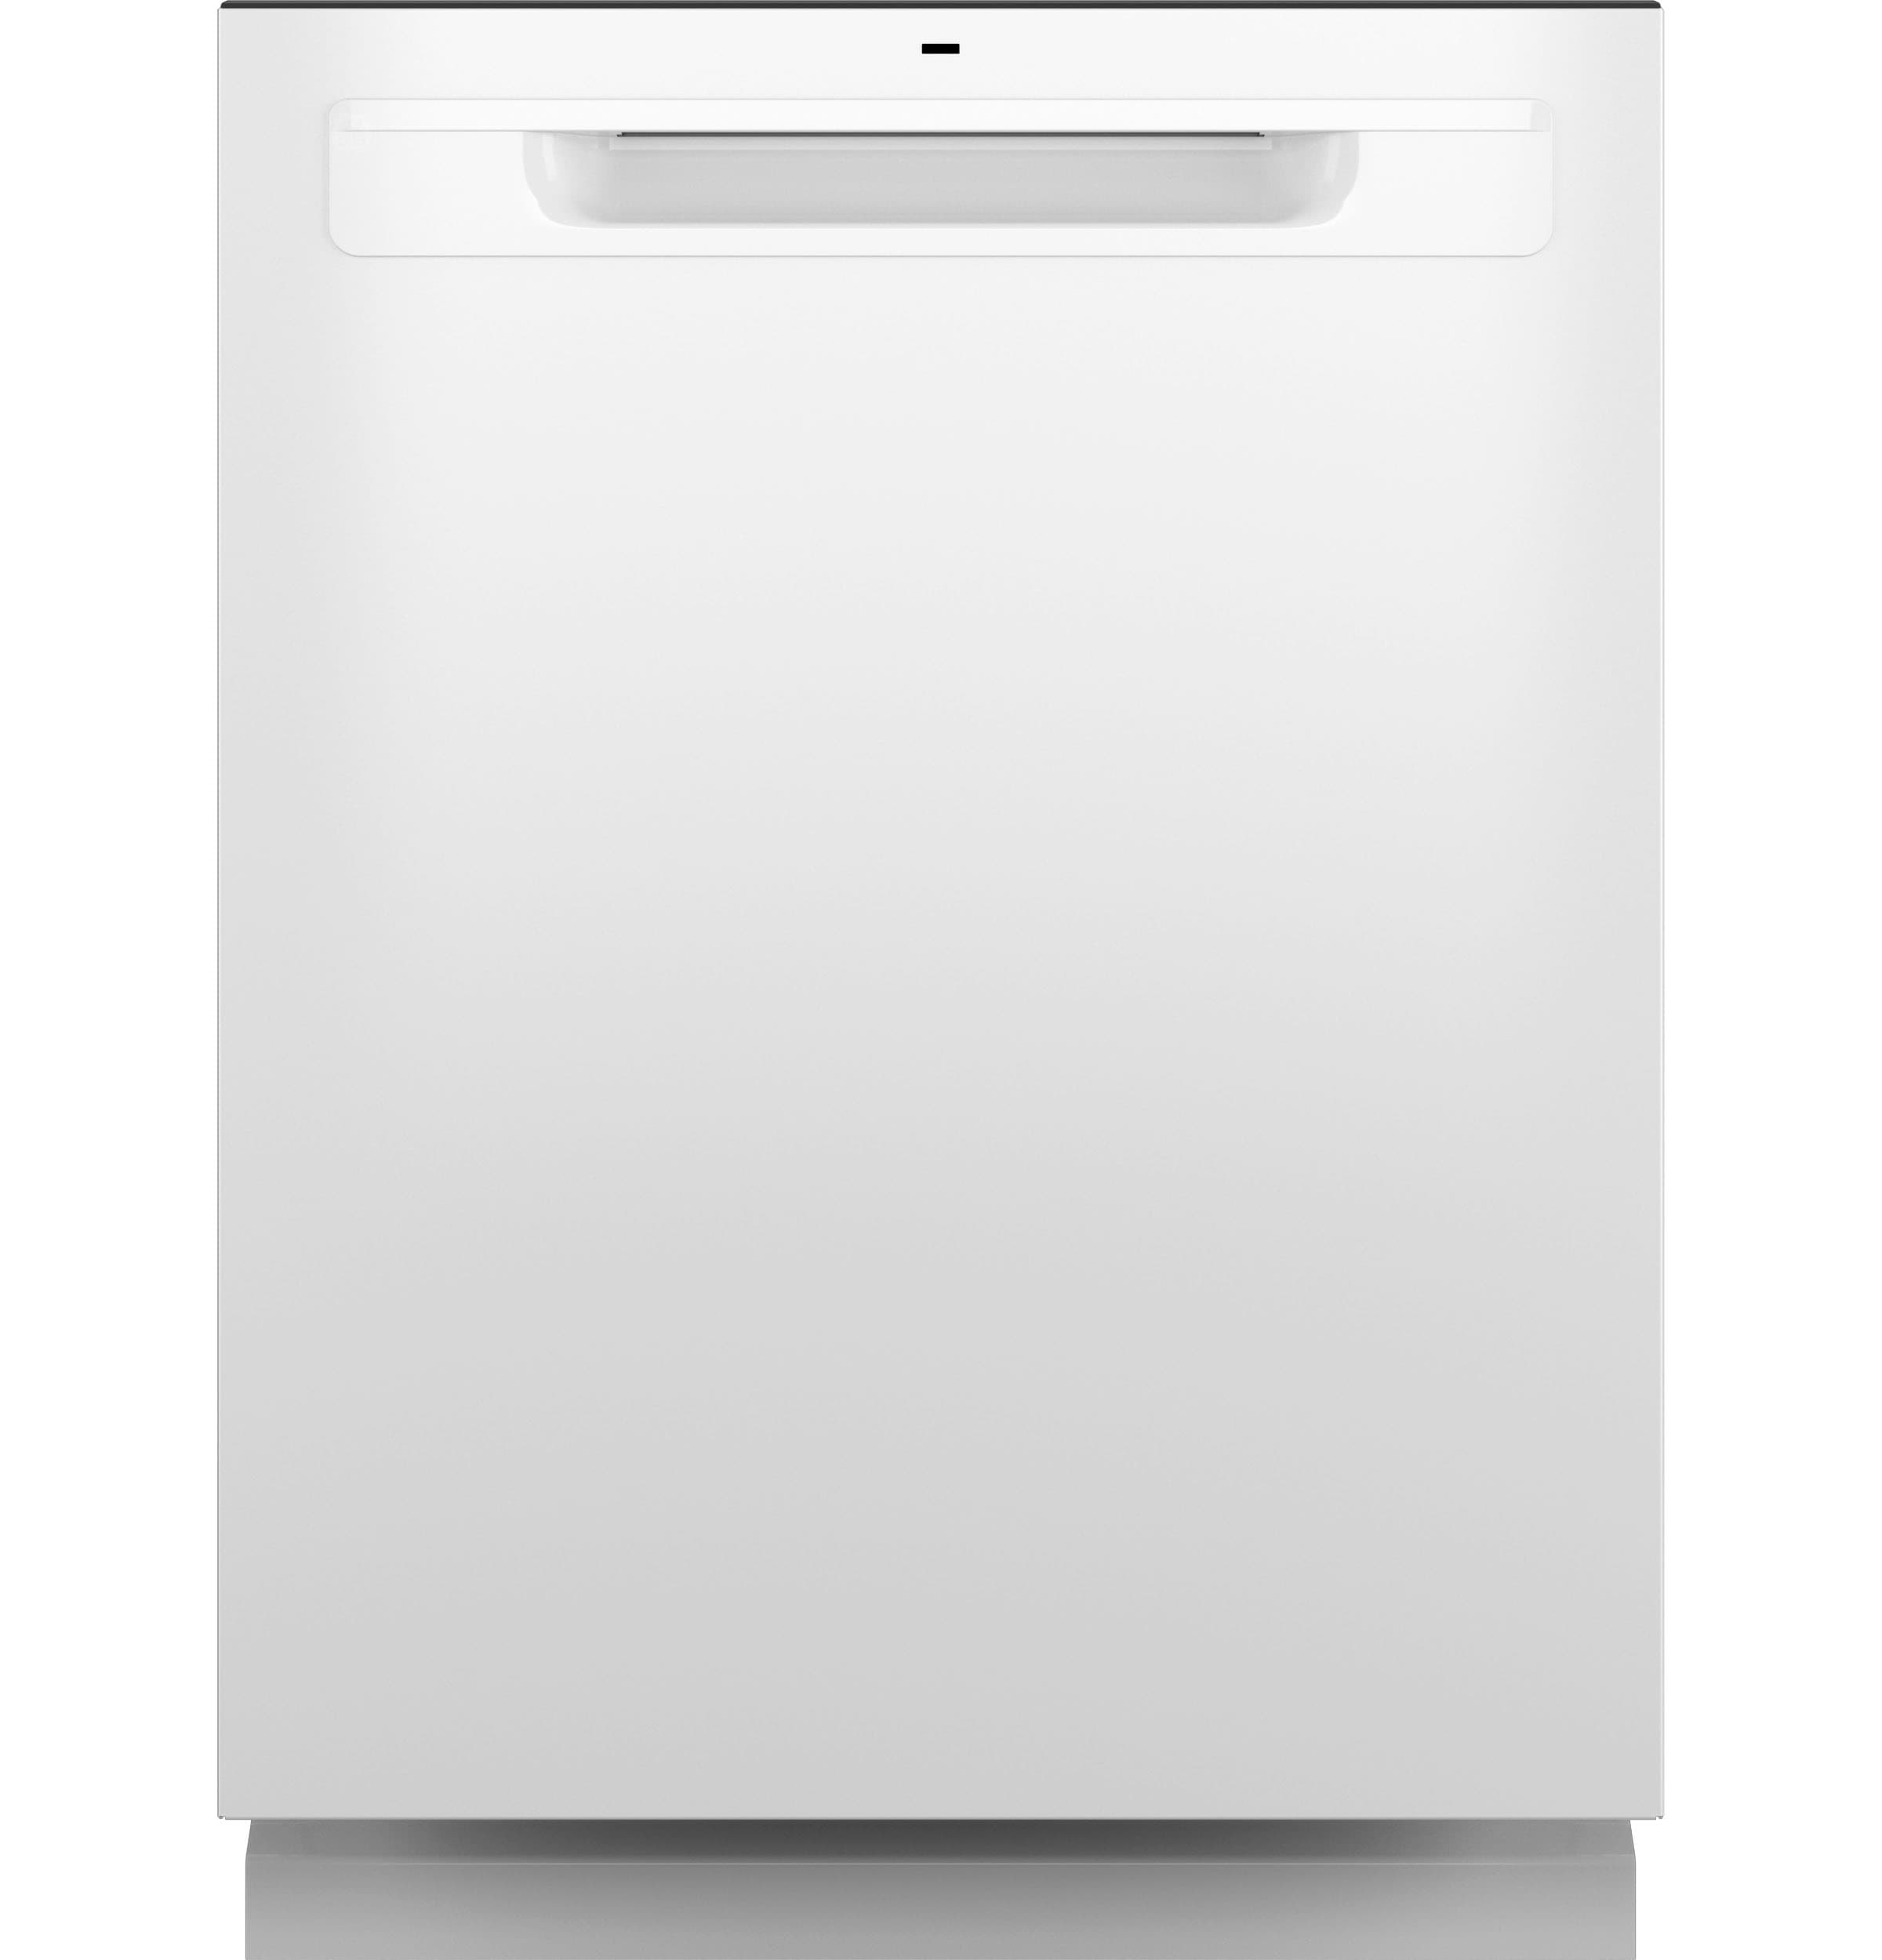 2023 Frigidaire Front Control 24-in Built-In Dishwasher - For Sale - Retail  Scratch and Dent - (Unused) for sale